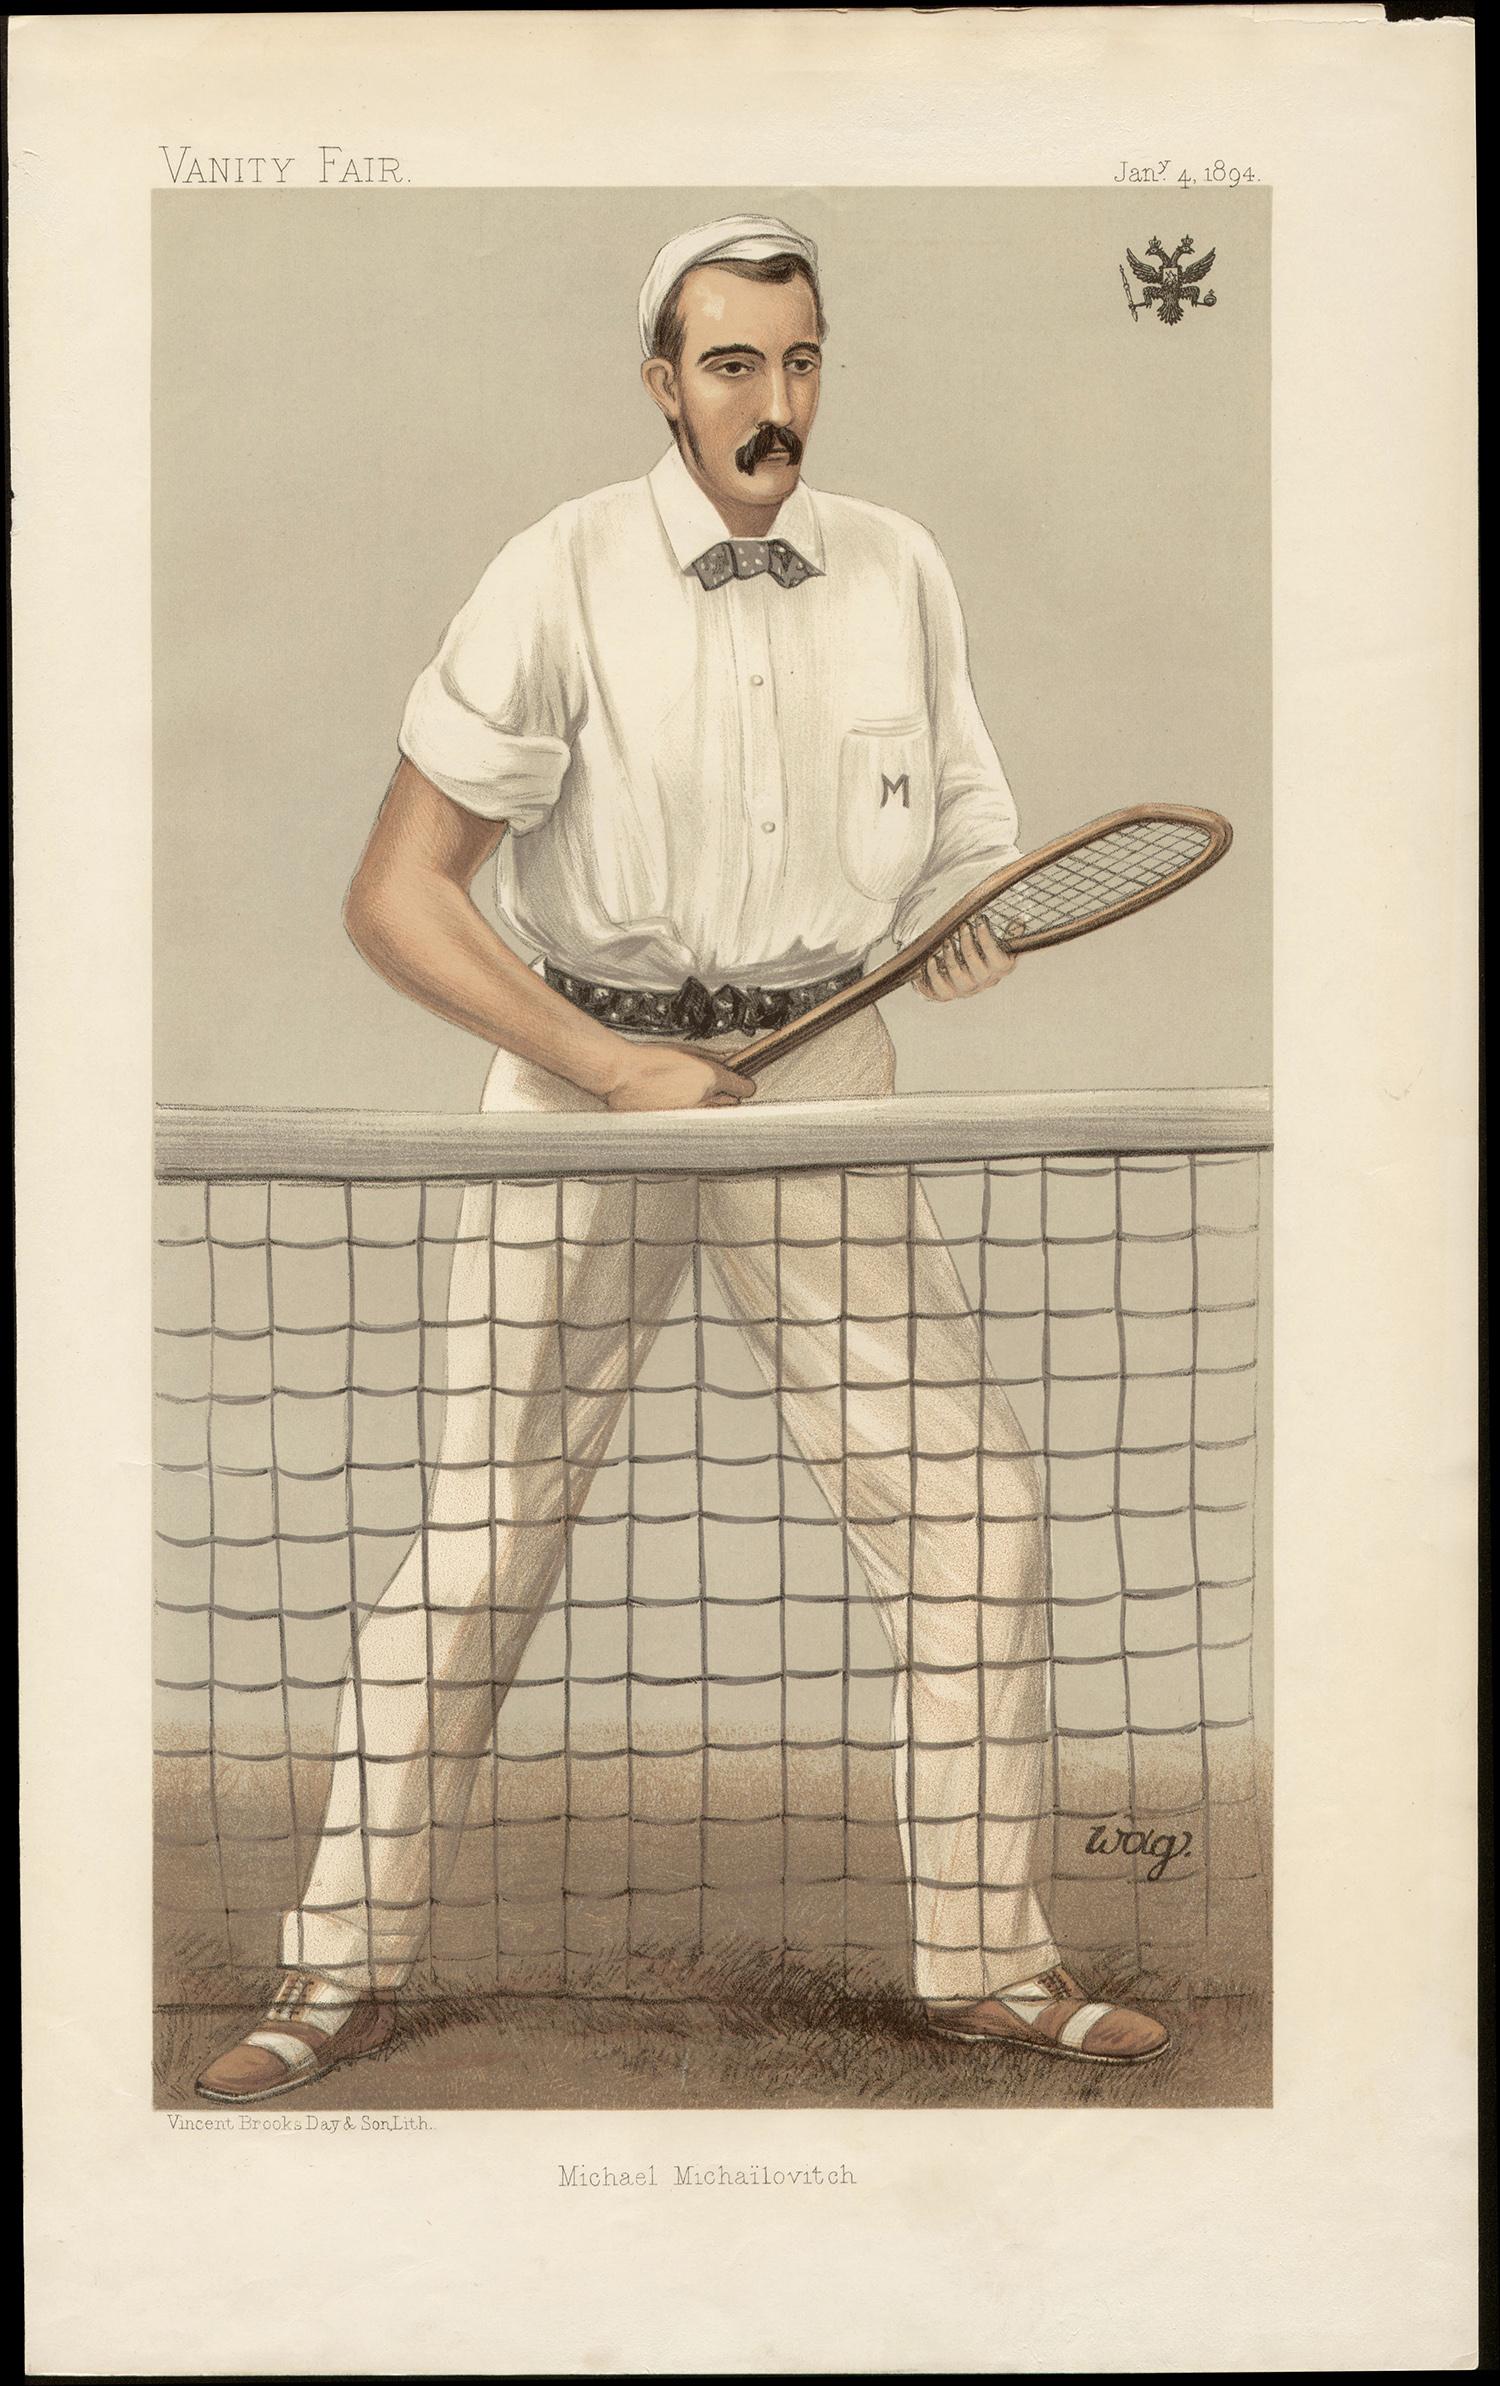 AG Witherby Figurative Print - Michael Michailovitch, Russian tennis player, Vanity Fair chromolithograph, 1894